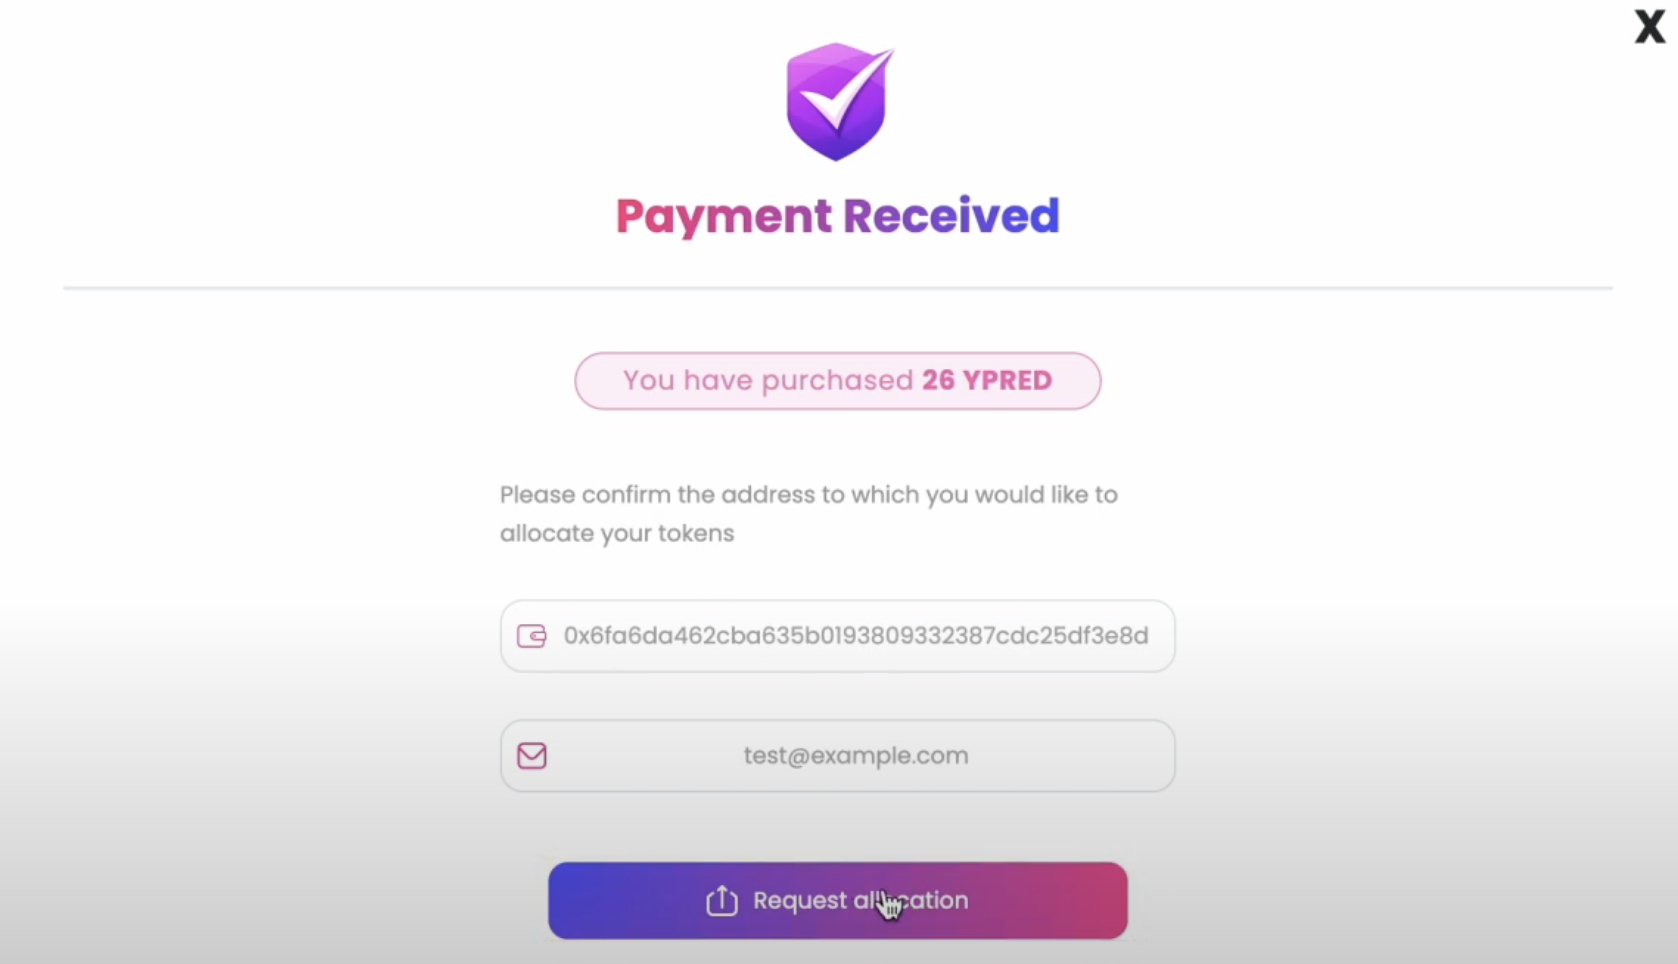 YPRED Payment Received